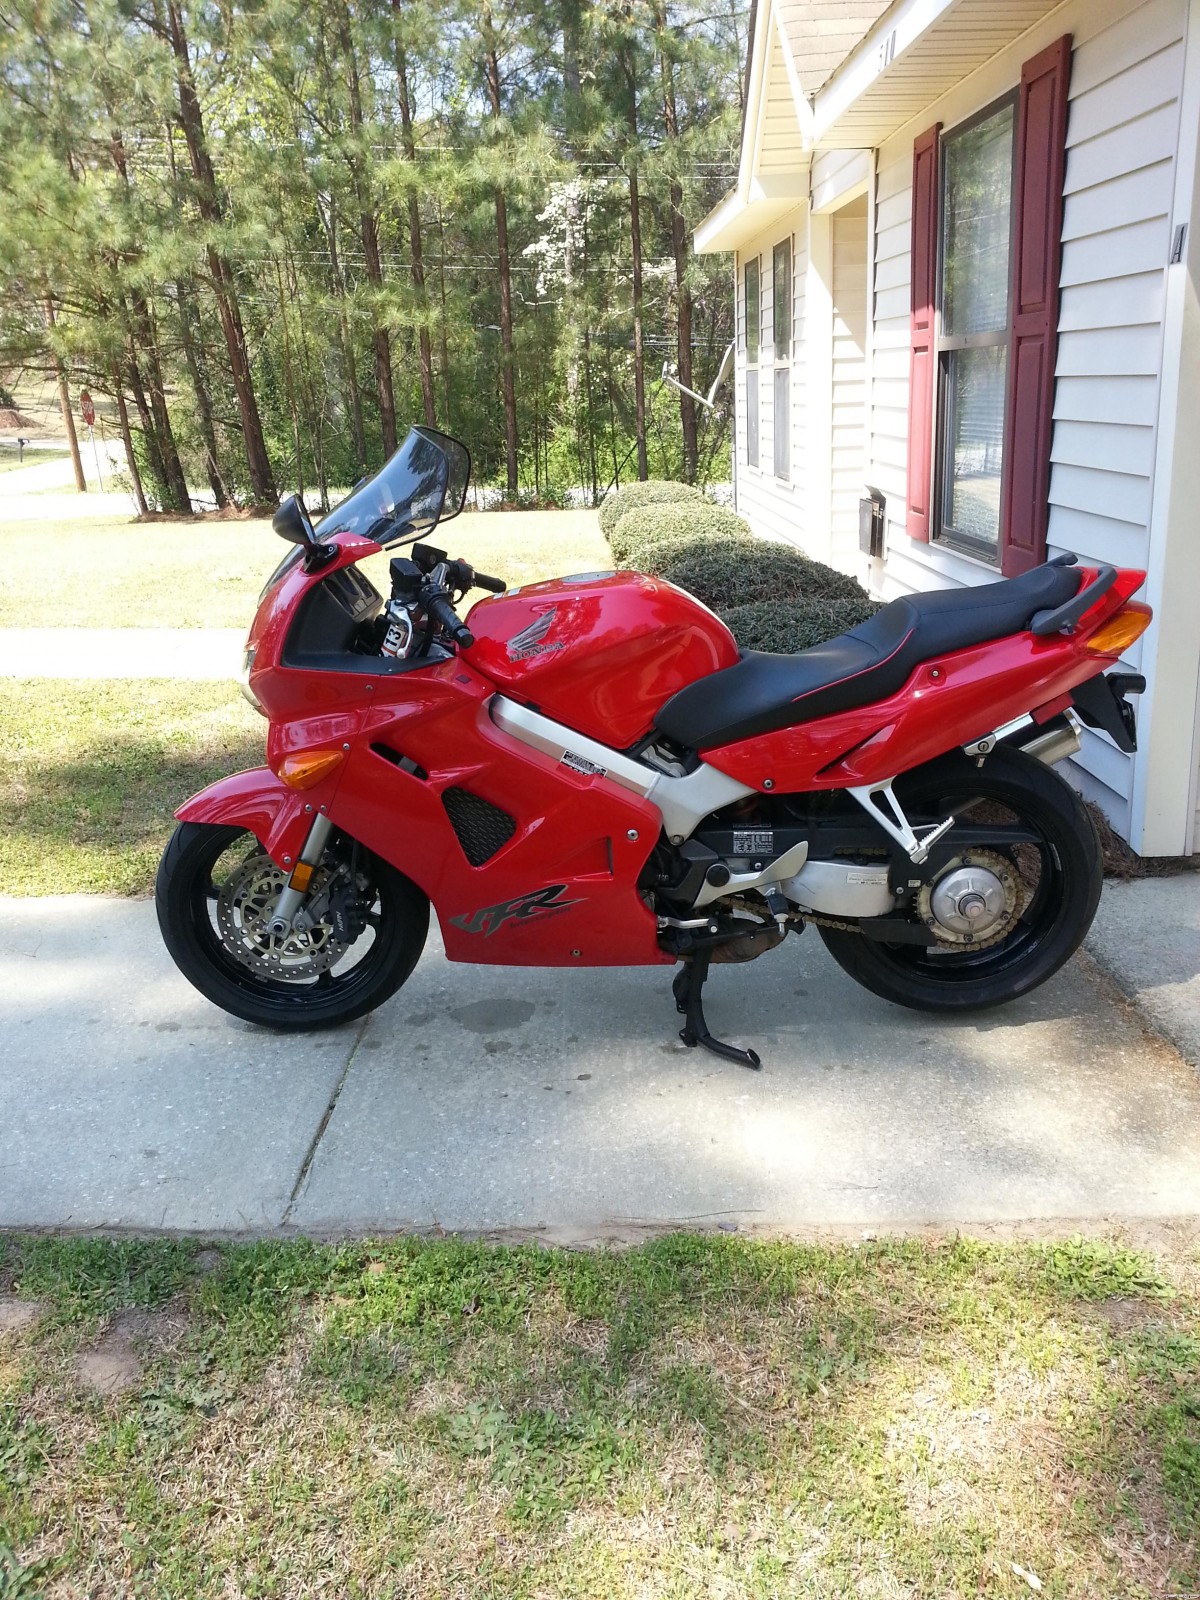 New to me 1998 VFR 800